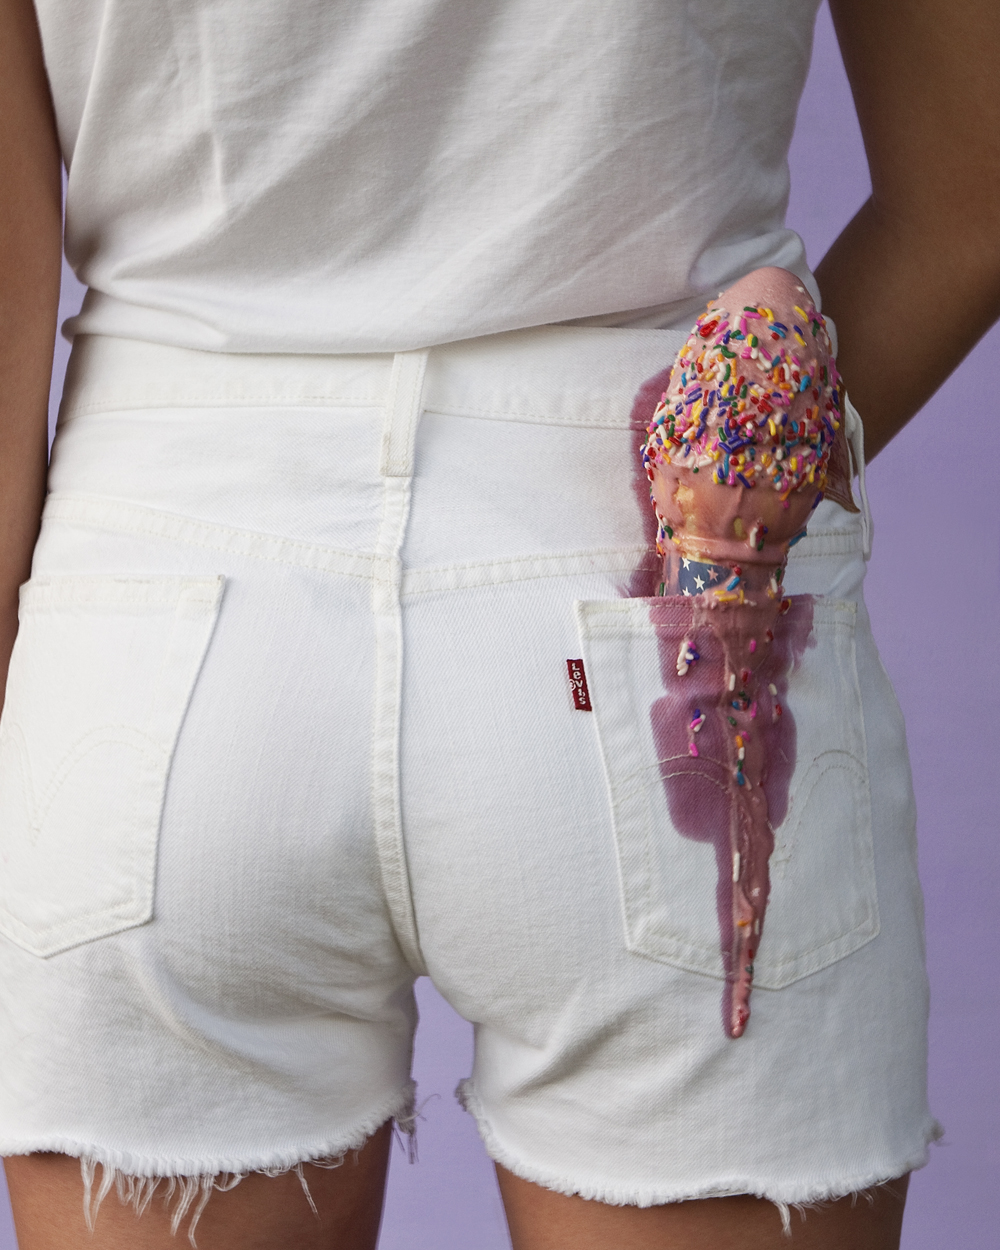 Illustrating America’s Silliest Laws With Equally Silly Photographs (NSFW)